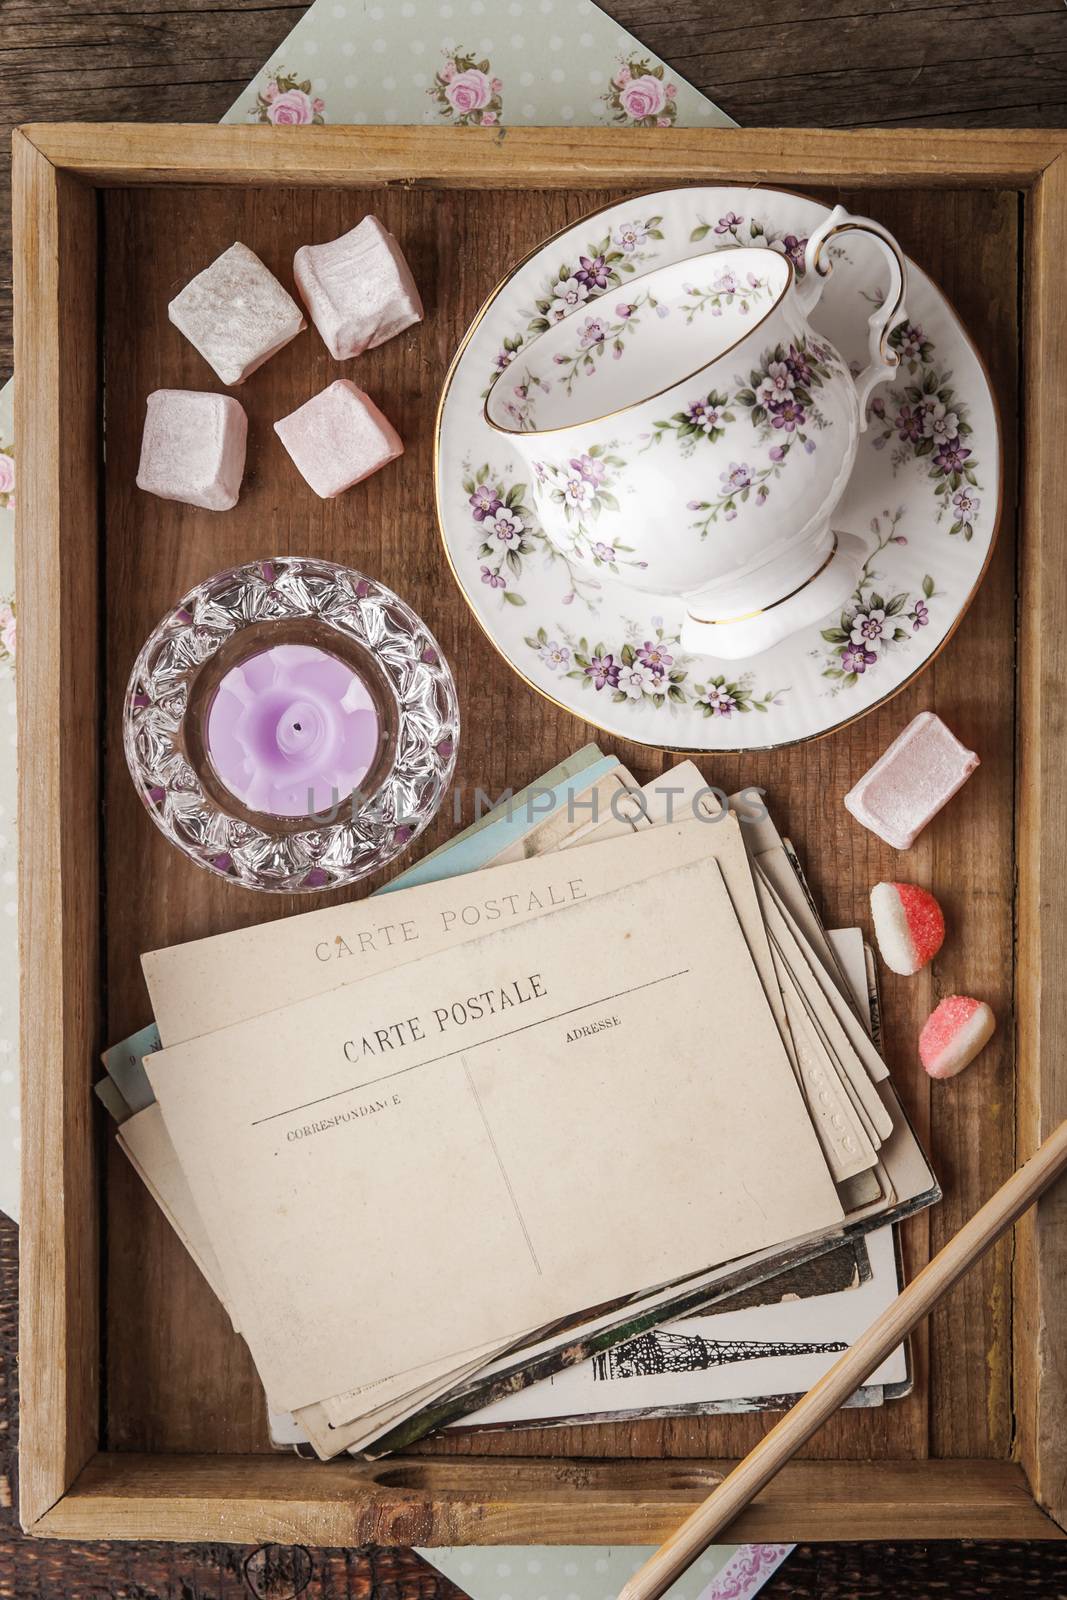 Tea things with sweets and postcards on the wooden tray